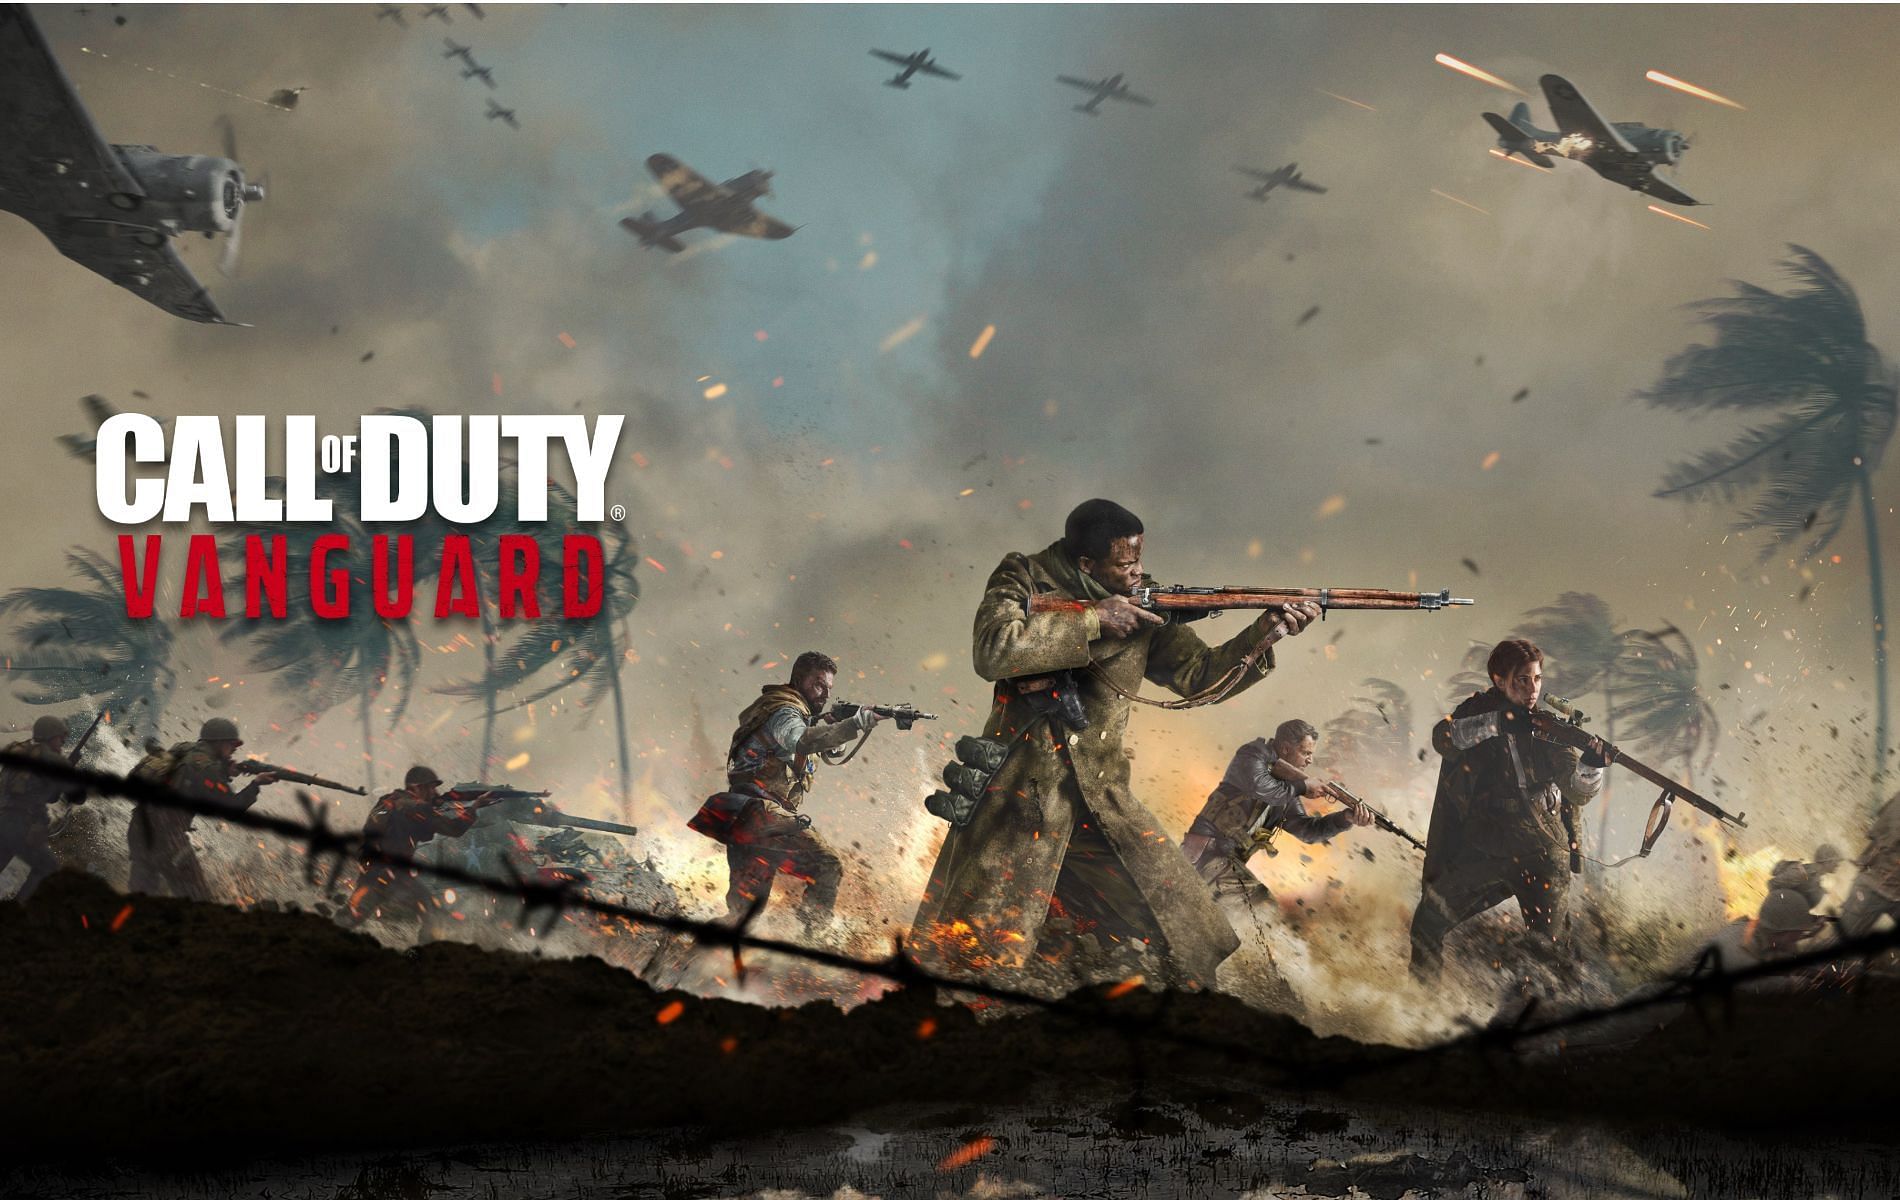 Call of Duty Vanguard garnered a mixed reaction from the community following its successful launch in 2021 (Image via Activision)